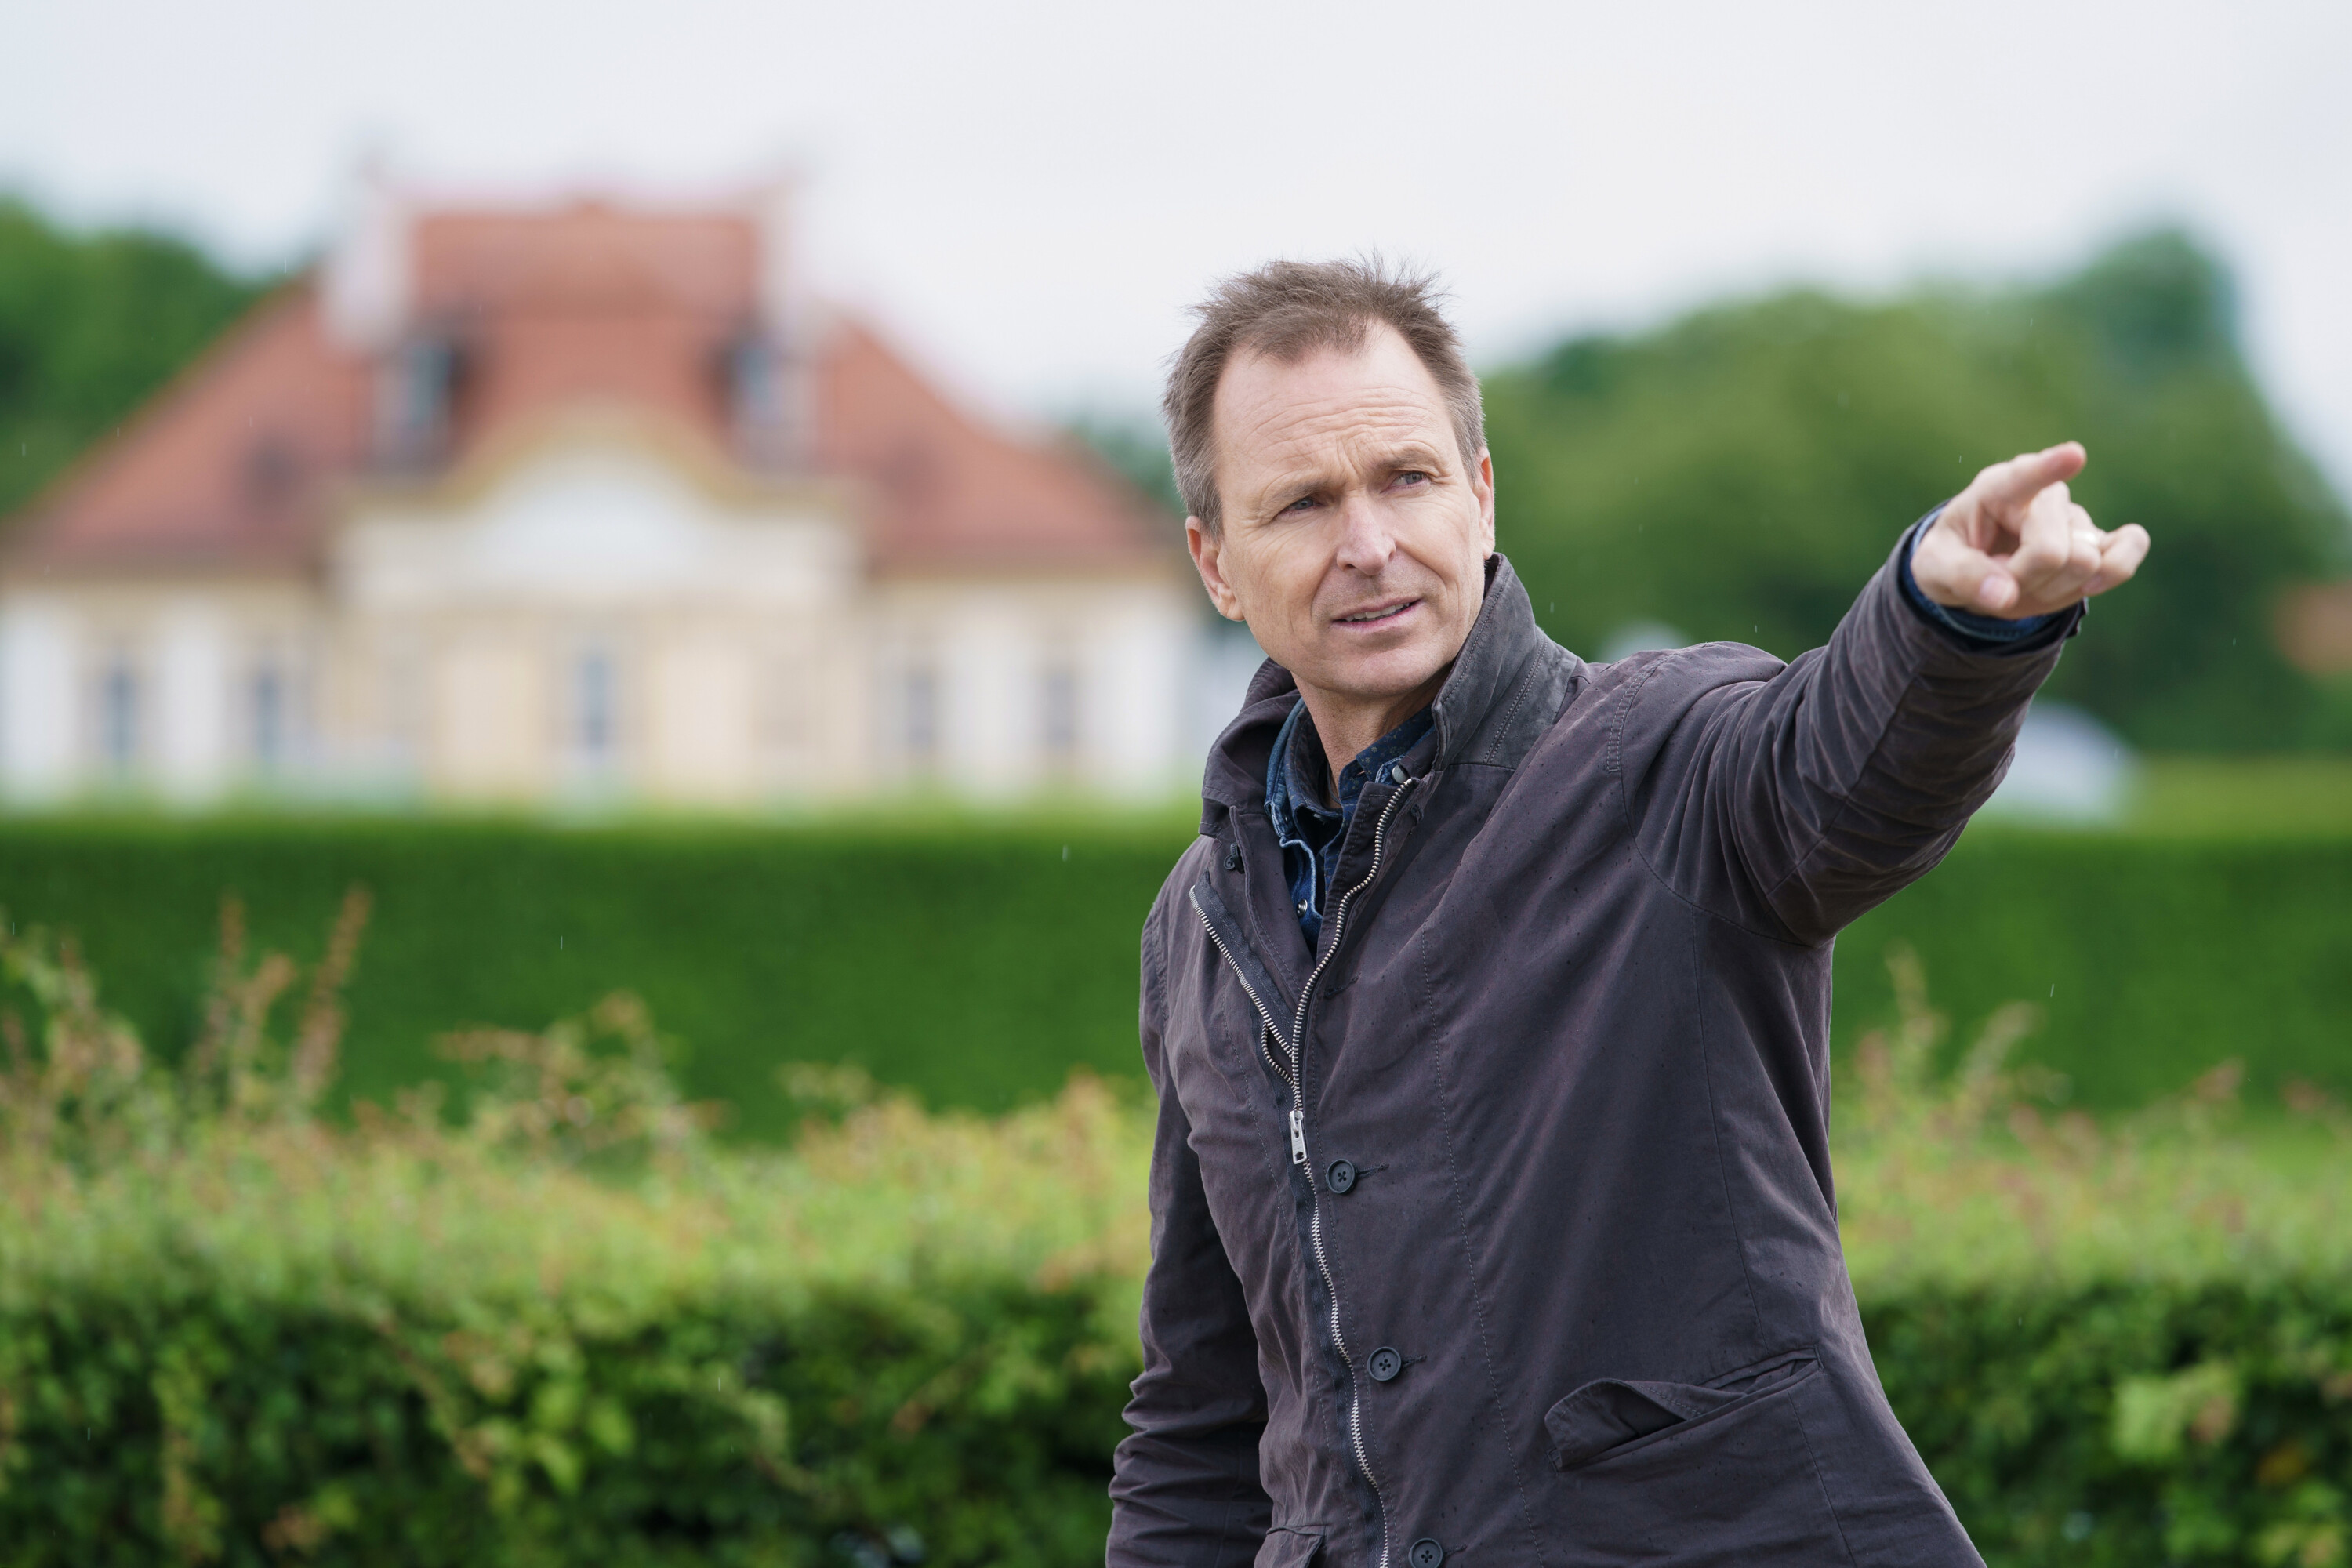 ‘The Amazing Race’: Phil Keoghan Promises Travel Will Return to Normal Soon